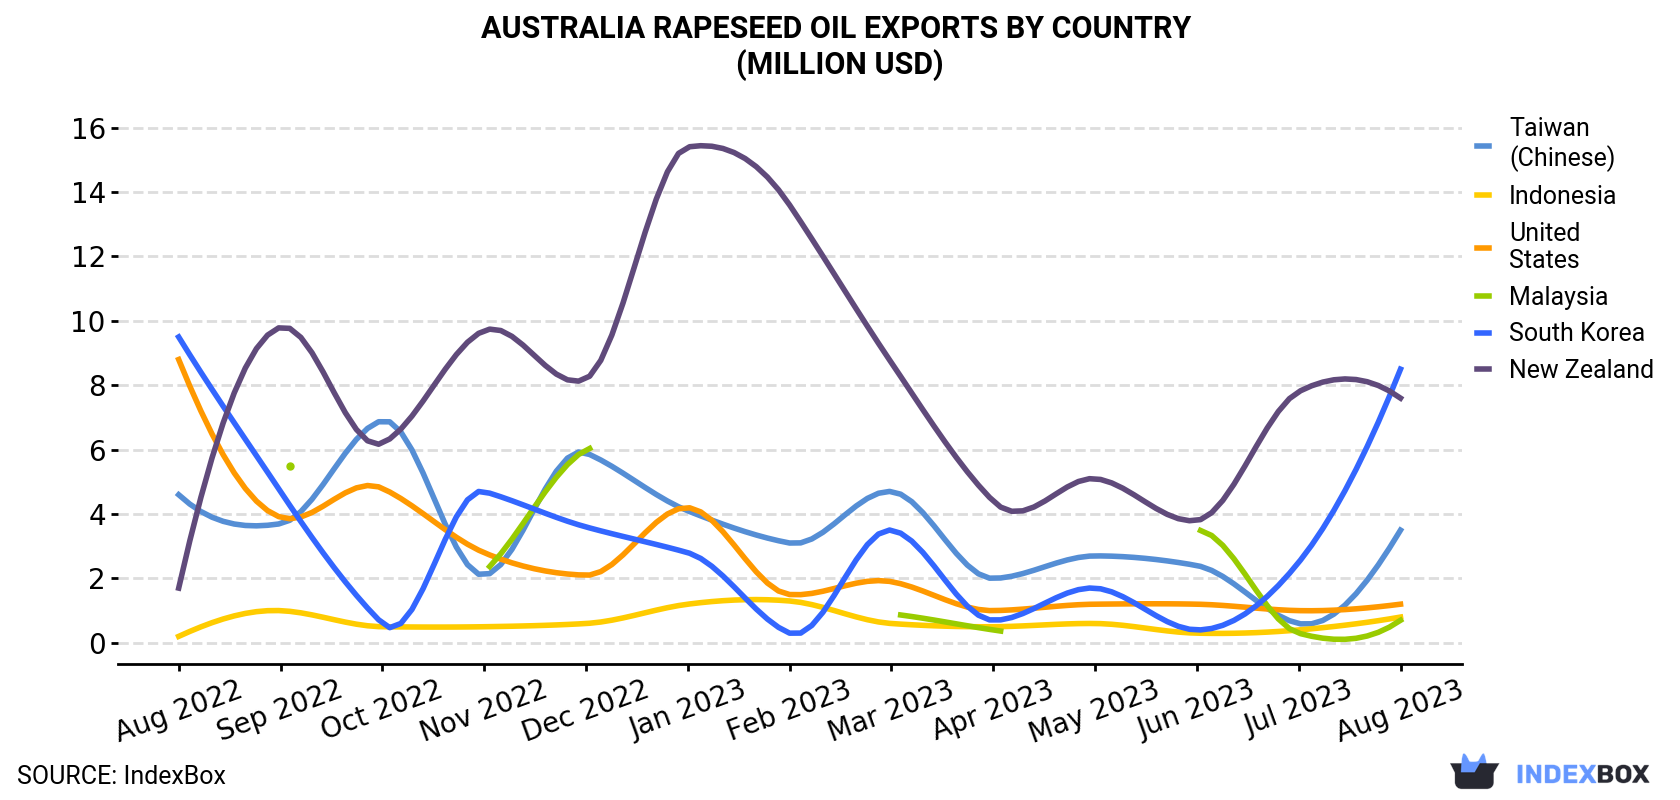 Australia Rapeseed Oil Exports By Country (Million USD)